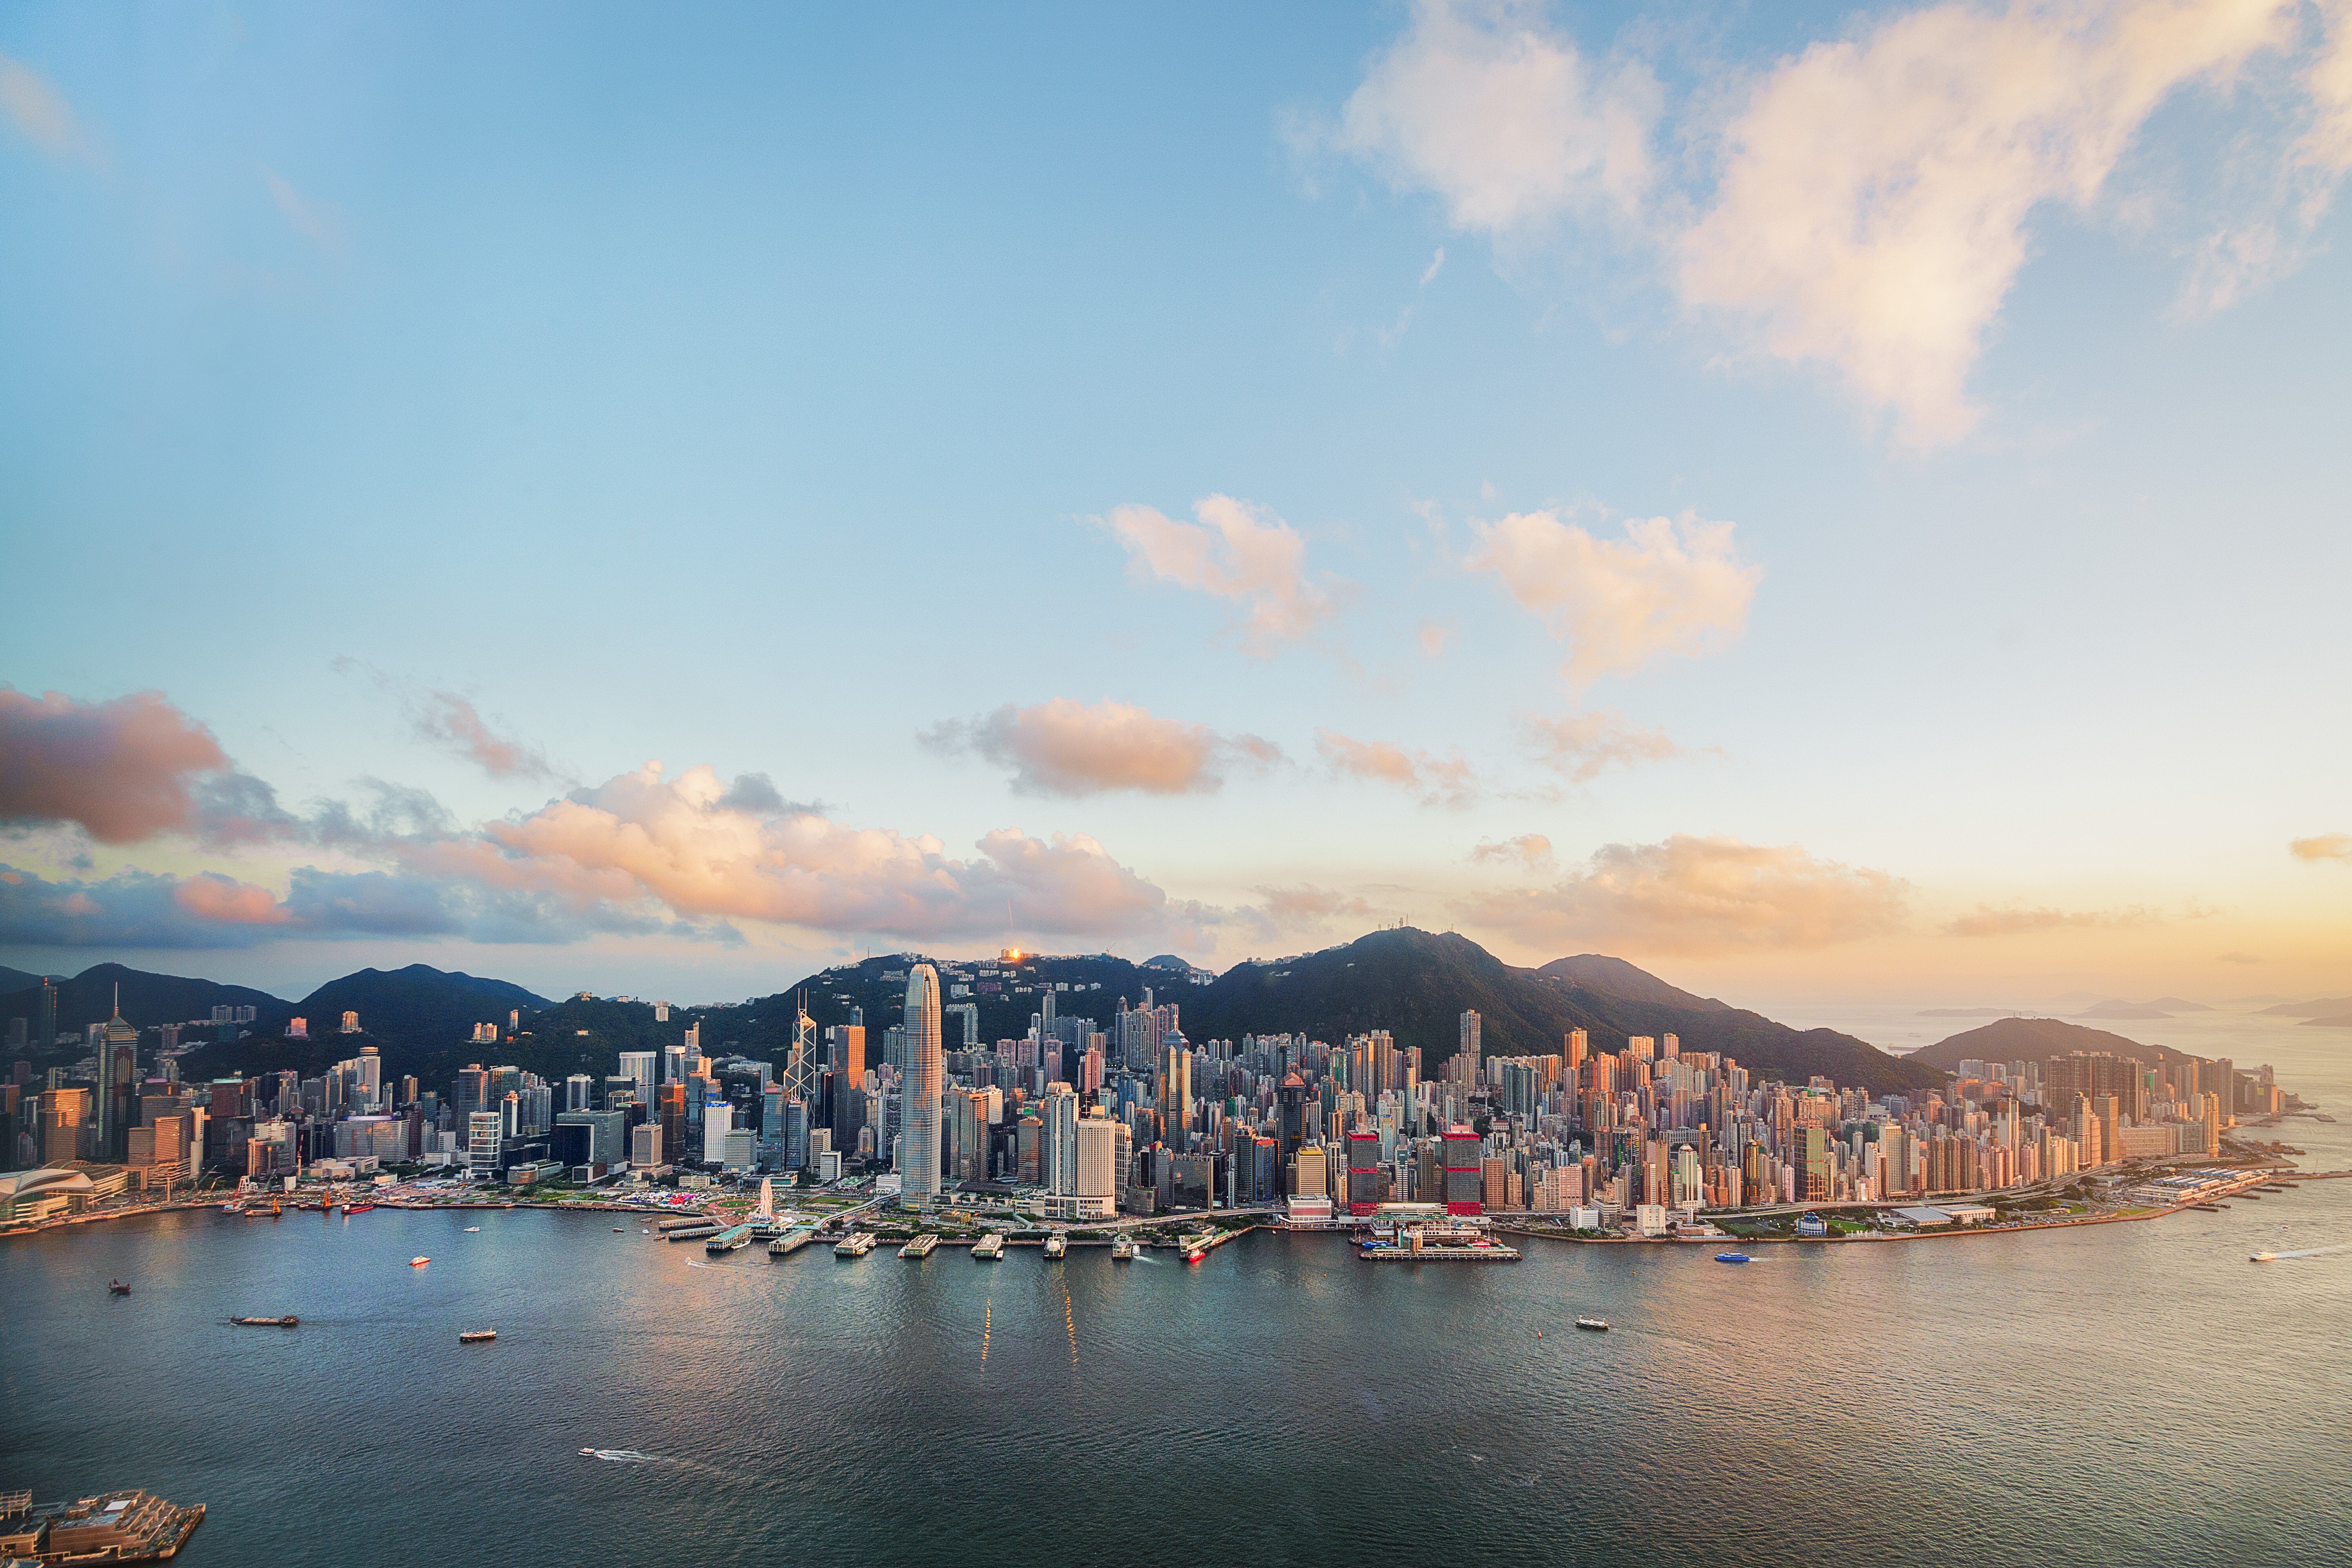 Hong Kong Island and Victoria Harbour from the air. Photo: Getty Images